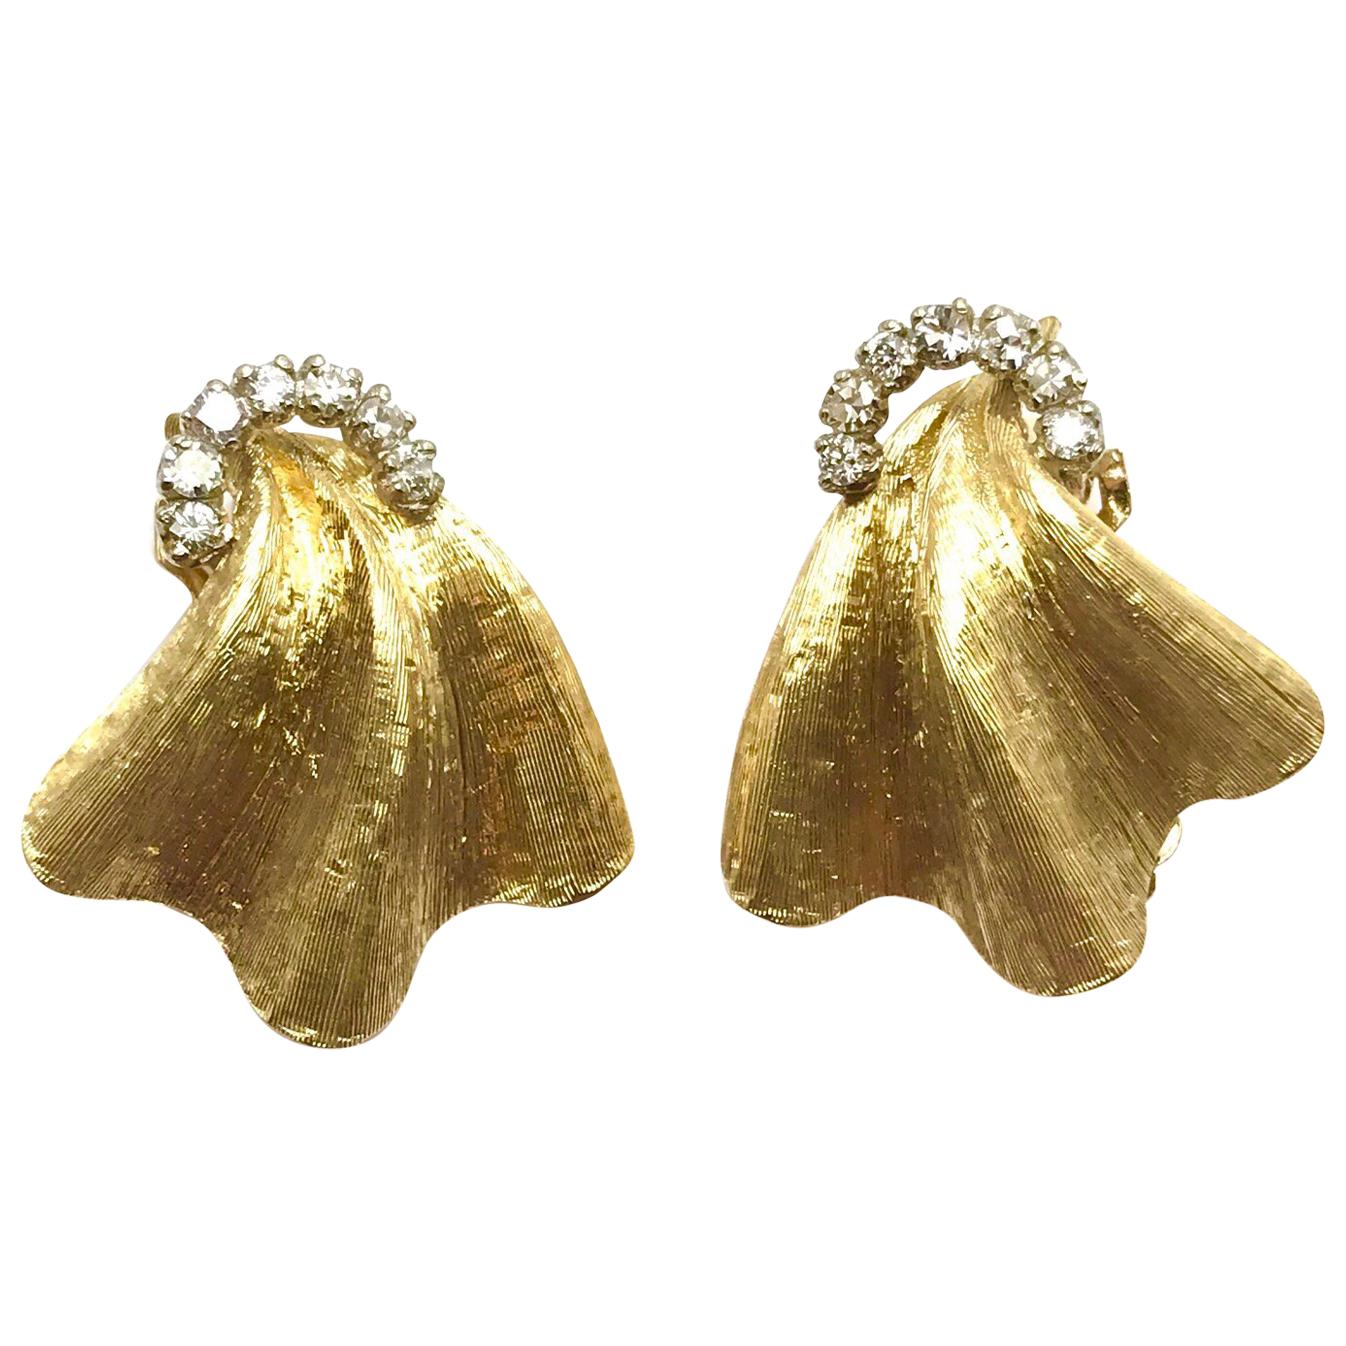 0.20 Carat Round Diamond and Brushed Yellow Gold Clip Earrings